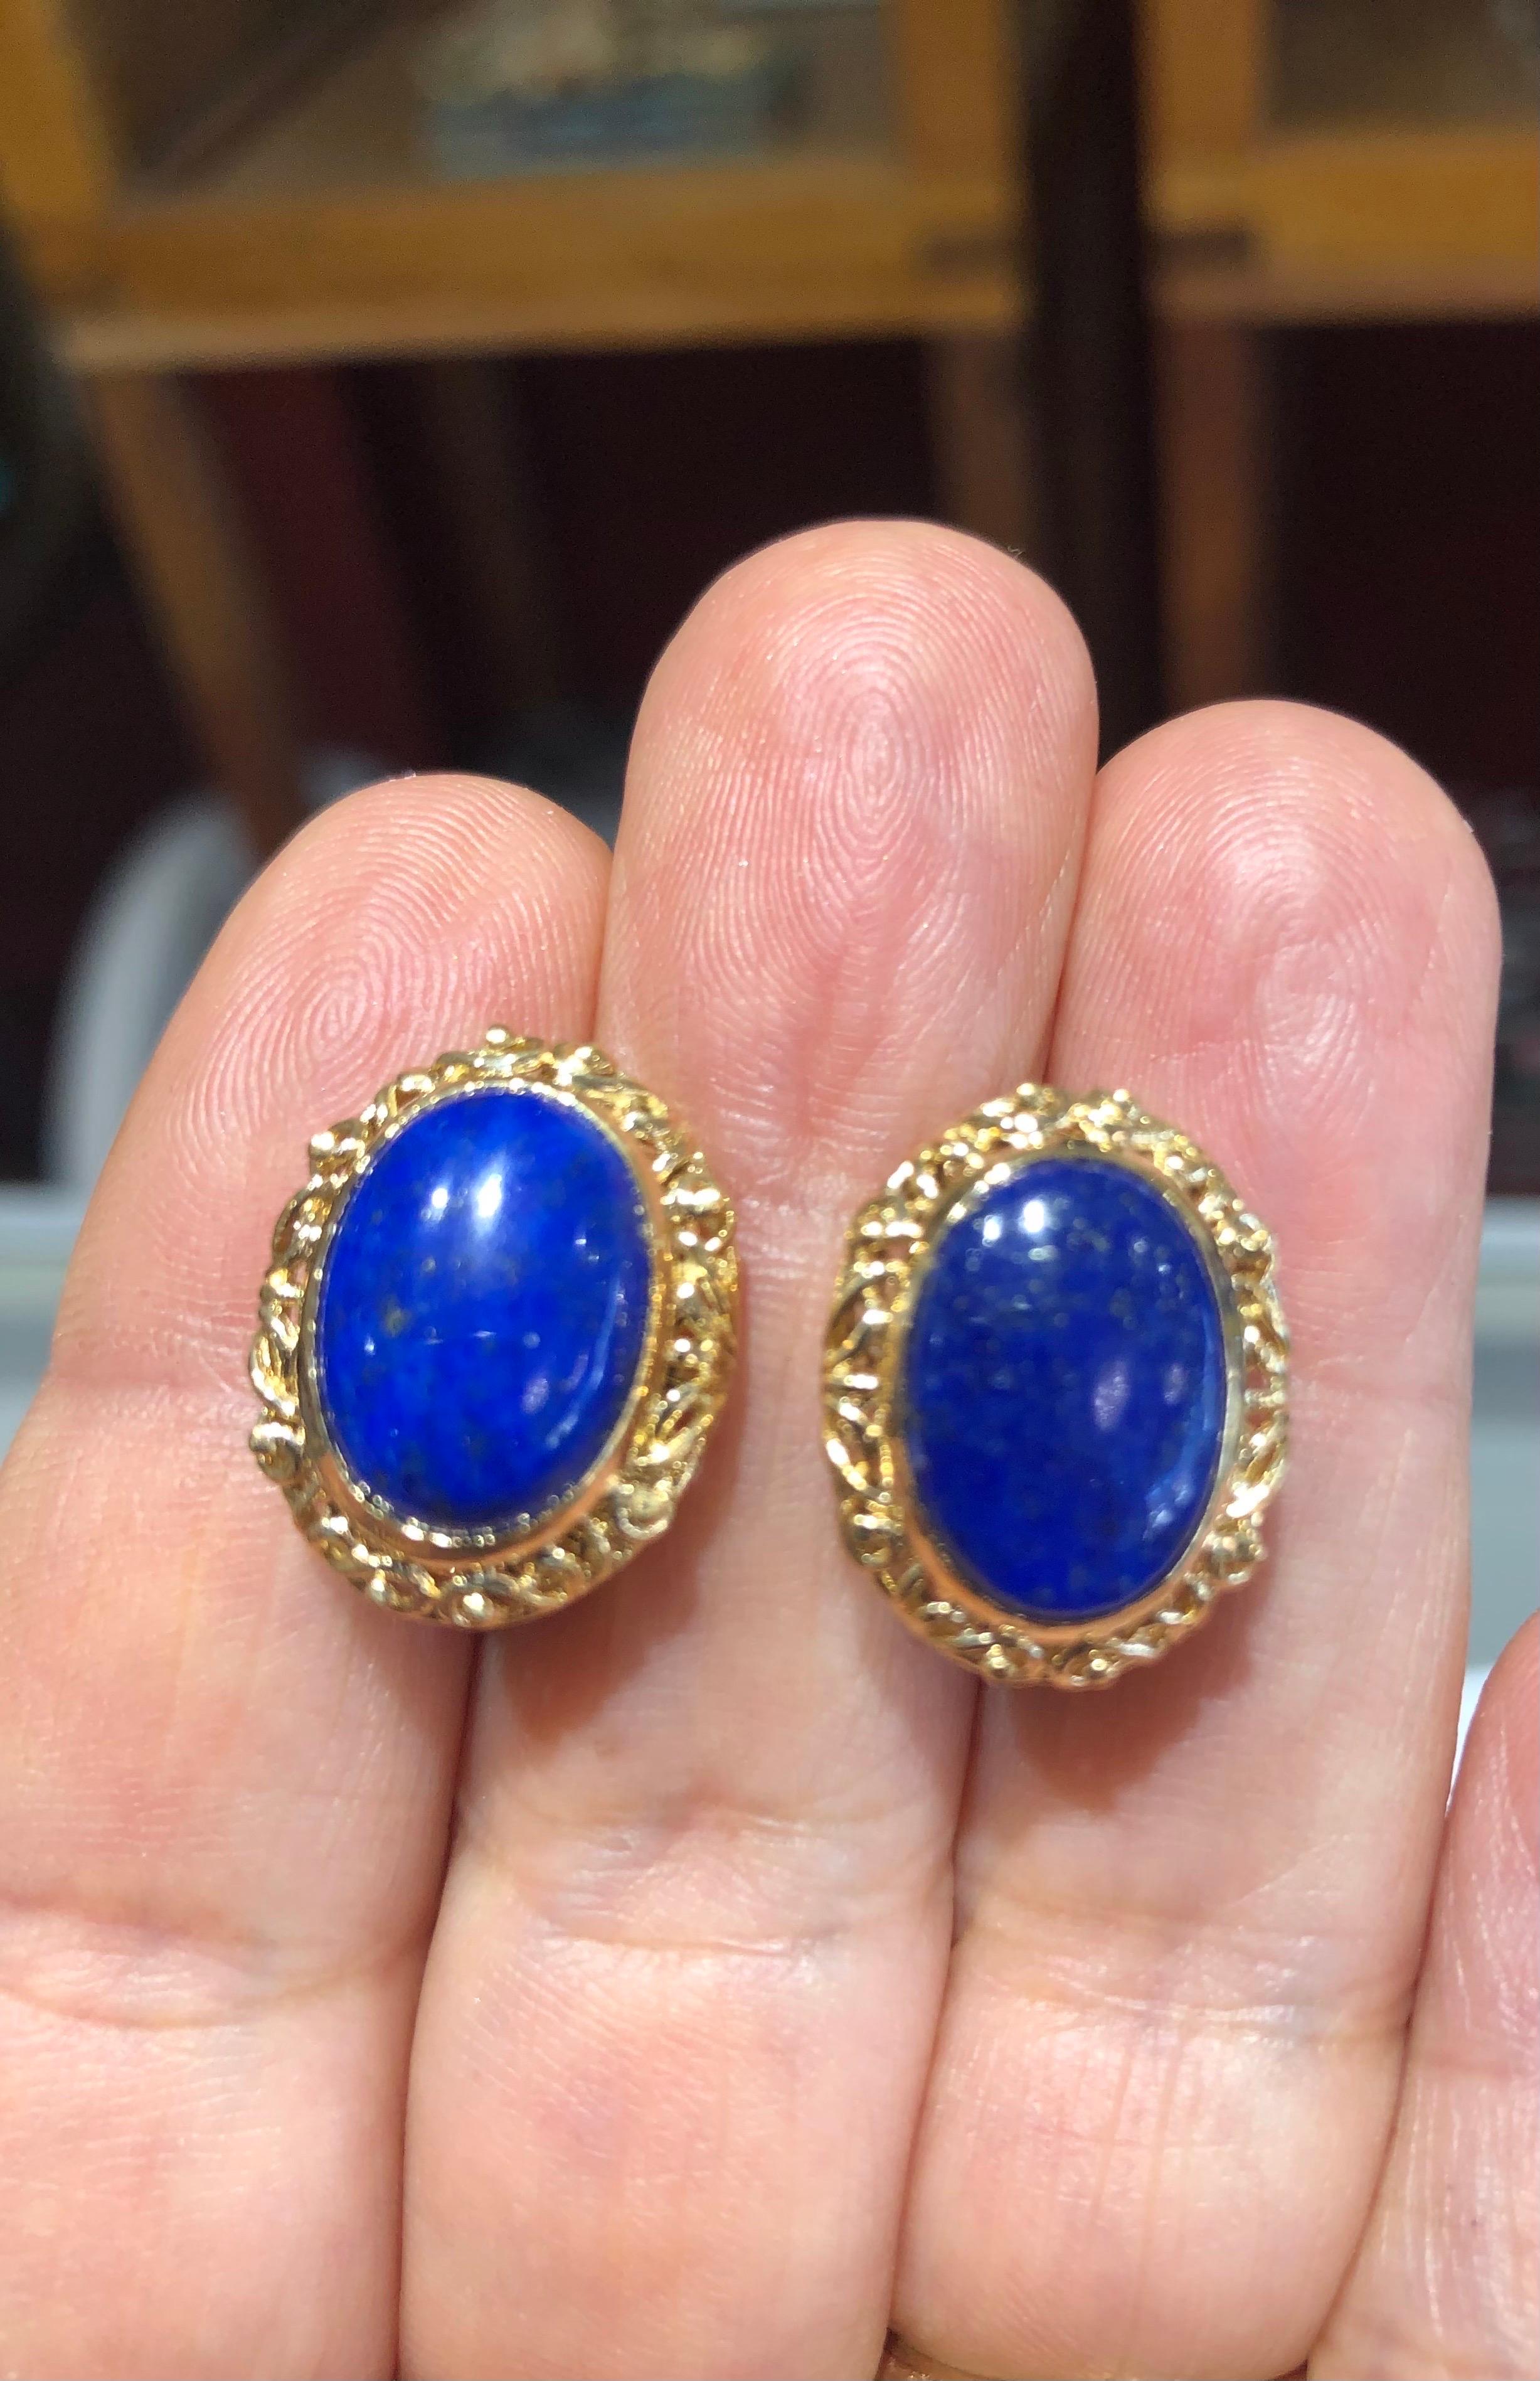 A stylish estate pair of Lapis lazuli earrings, featuring a stunning scroll design of 18K yellow gold. They are set with two oval Lapis lazuli stones that measure 14mm x 10mm and weigh 9.6 grams.
Circa the 1990s.
Style: Clip-on/Omega Back 
Estate/